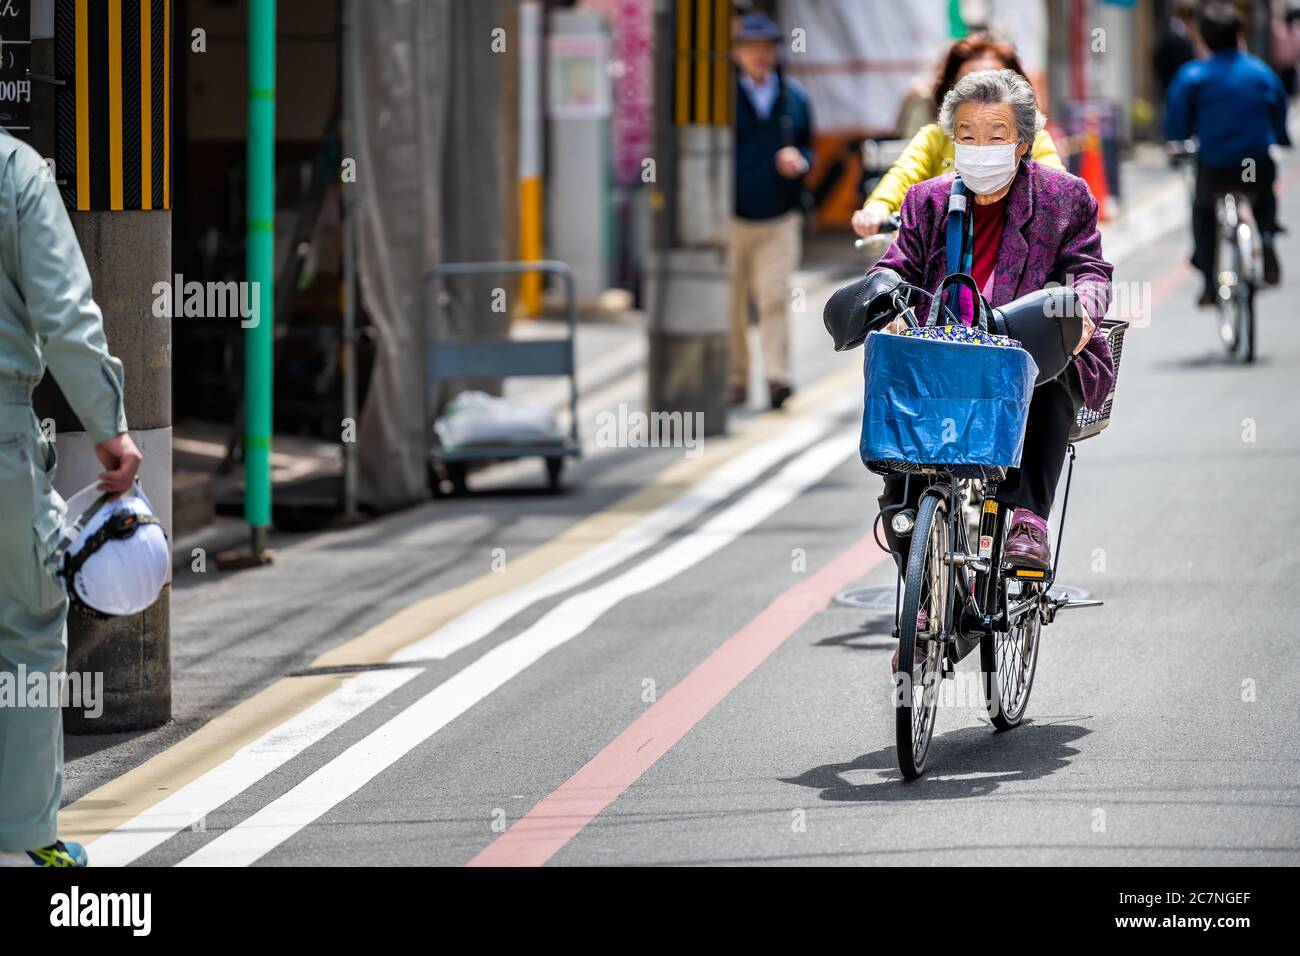 Kyoto, Japan - April 17, 2019: Kyoto downtown district with people local Japanese senior elderly person wearing mask face covering riding bicycle bike Stock Photo